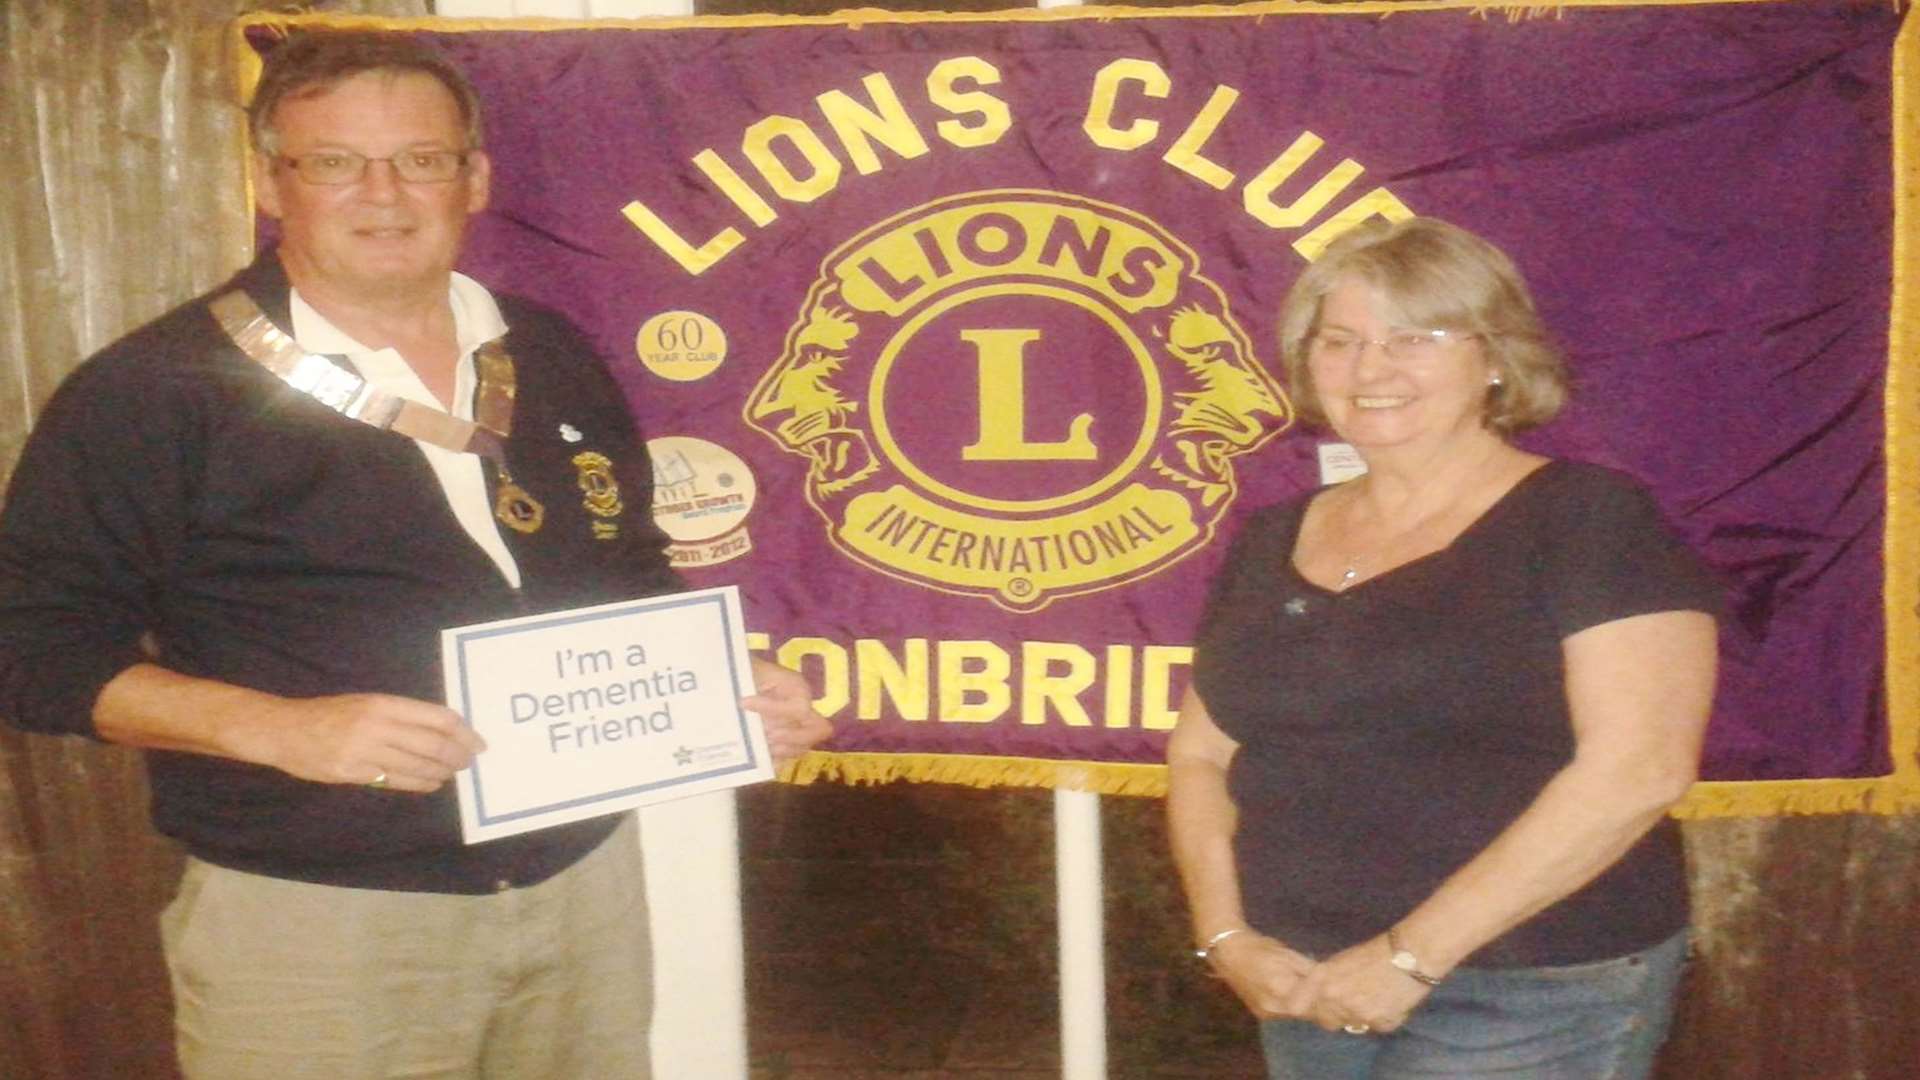 James Lark, President of the Tonbridge Lions Club, with Christine Parker, Managing Director of Abbey Funeral Services in Tonbridge